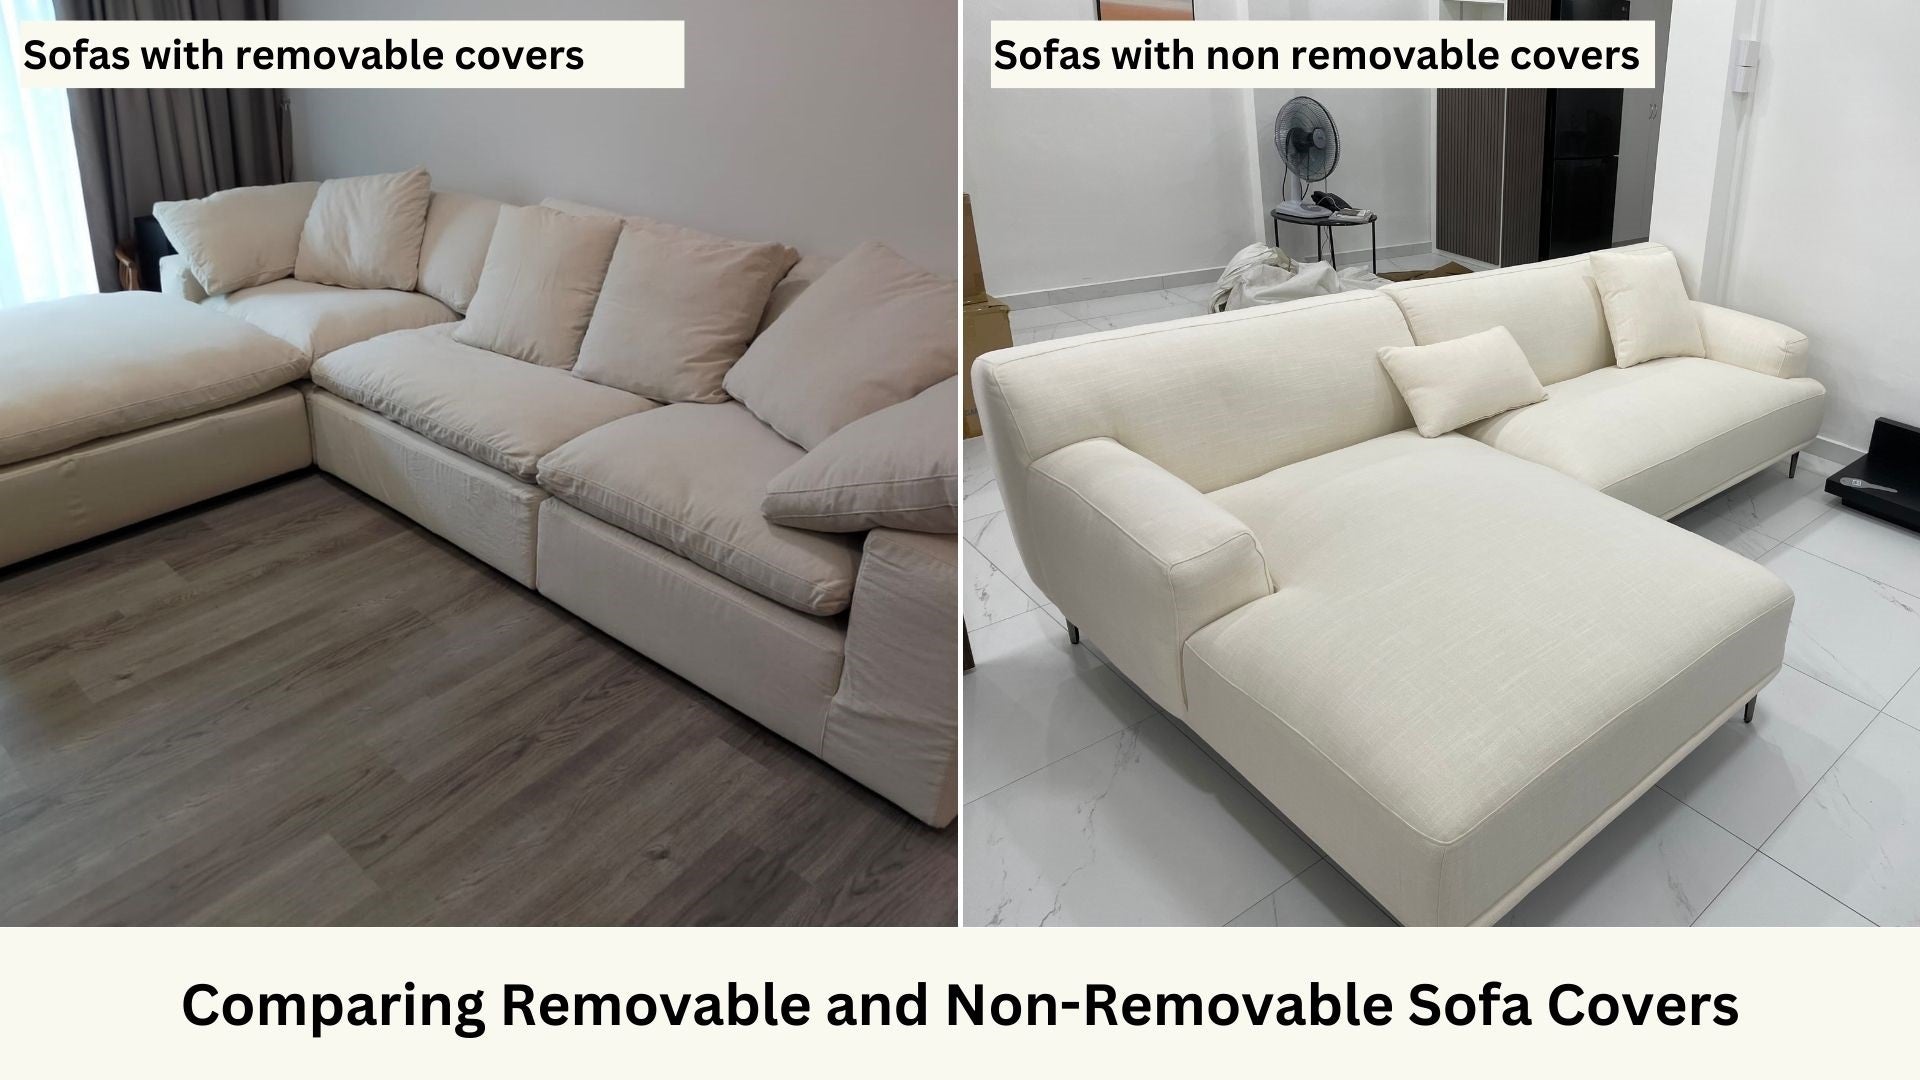 Comparing Removable and Non-Removable Sofa Covers